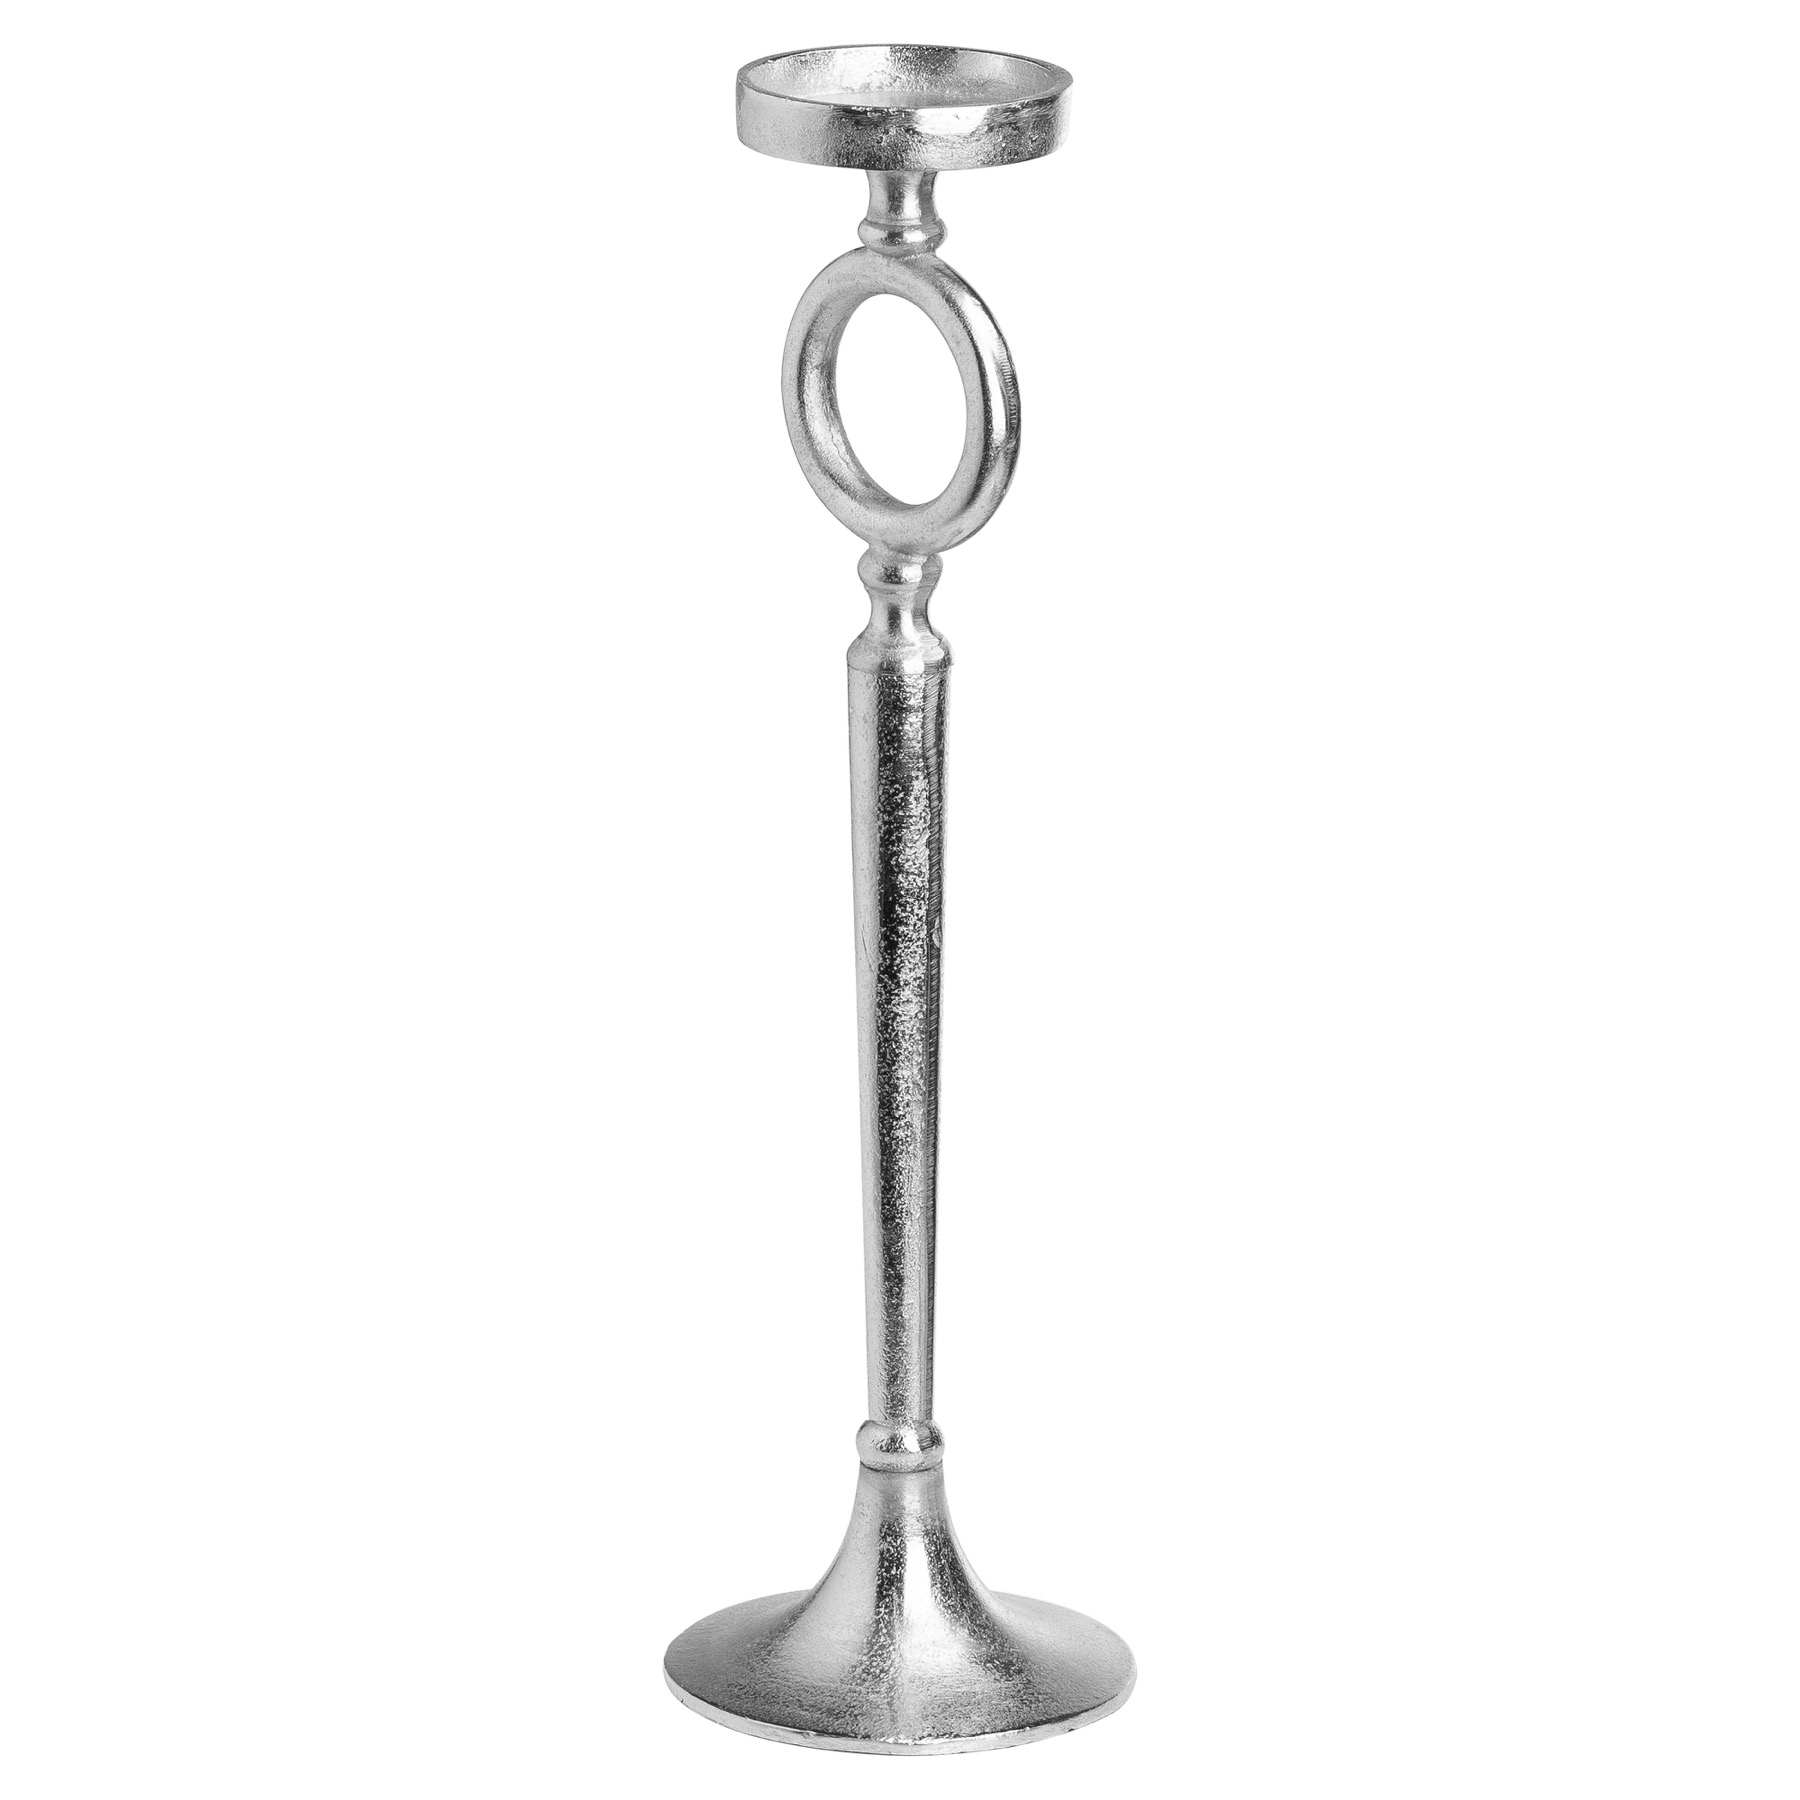 Farrah Collection Small Decor Candle Stand - Image 1